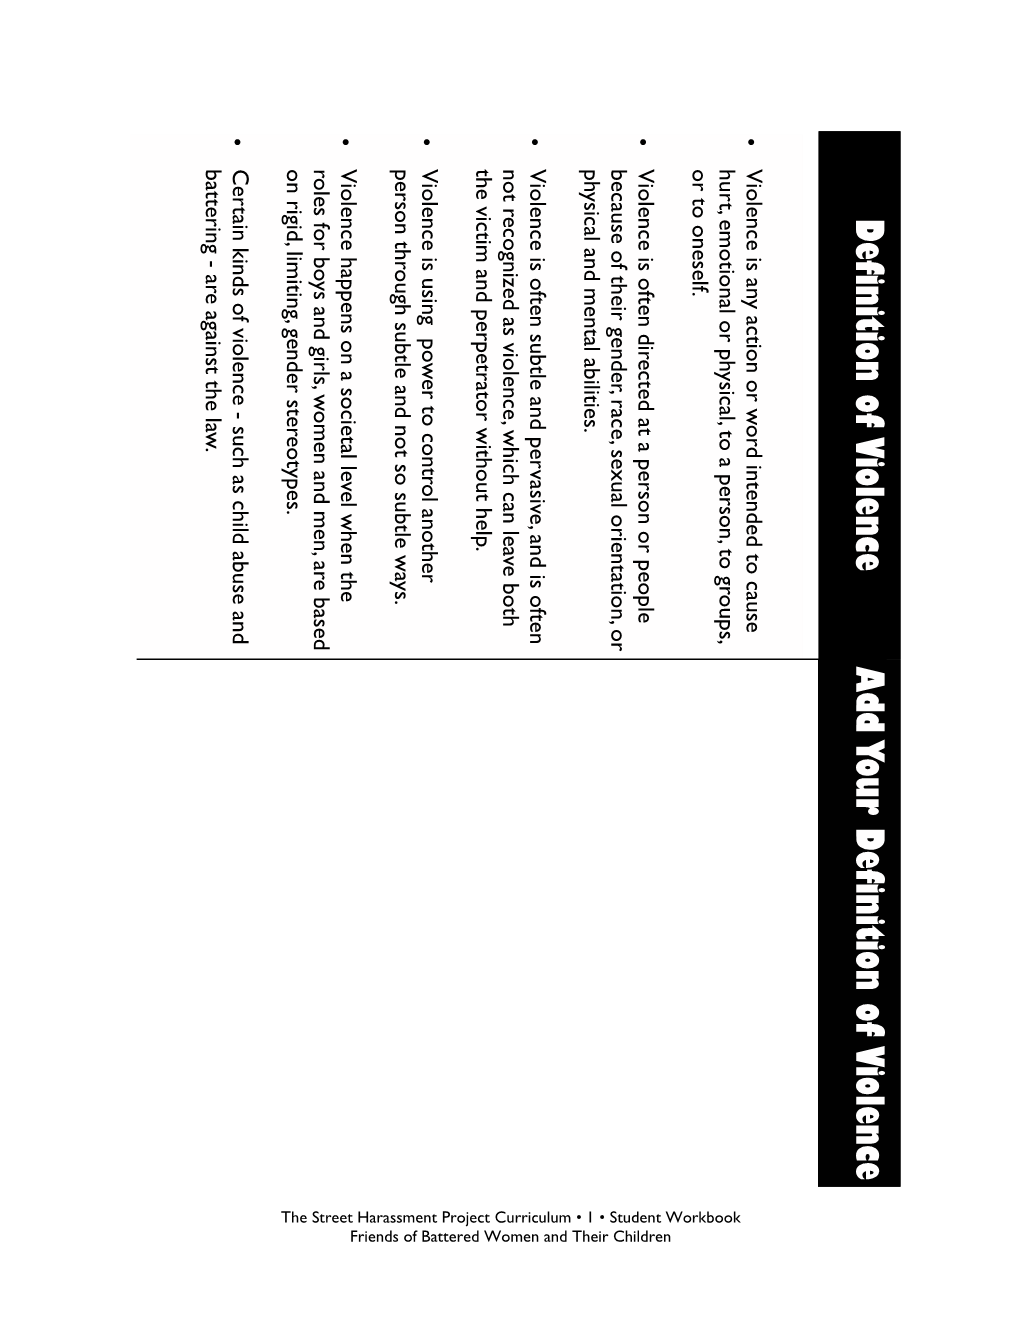 Worksheets for the SH Curriculum